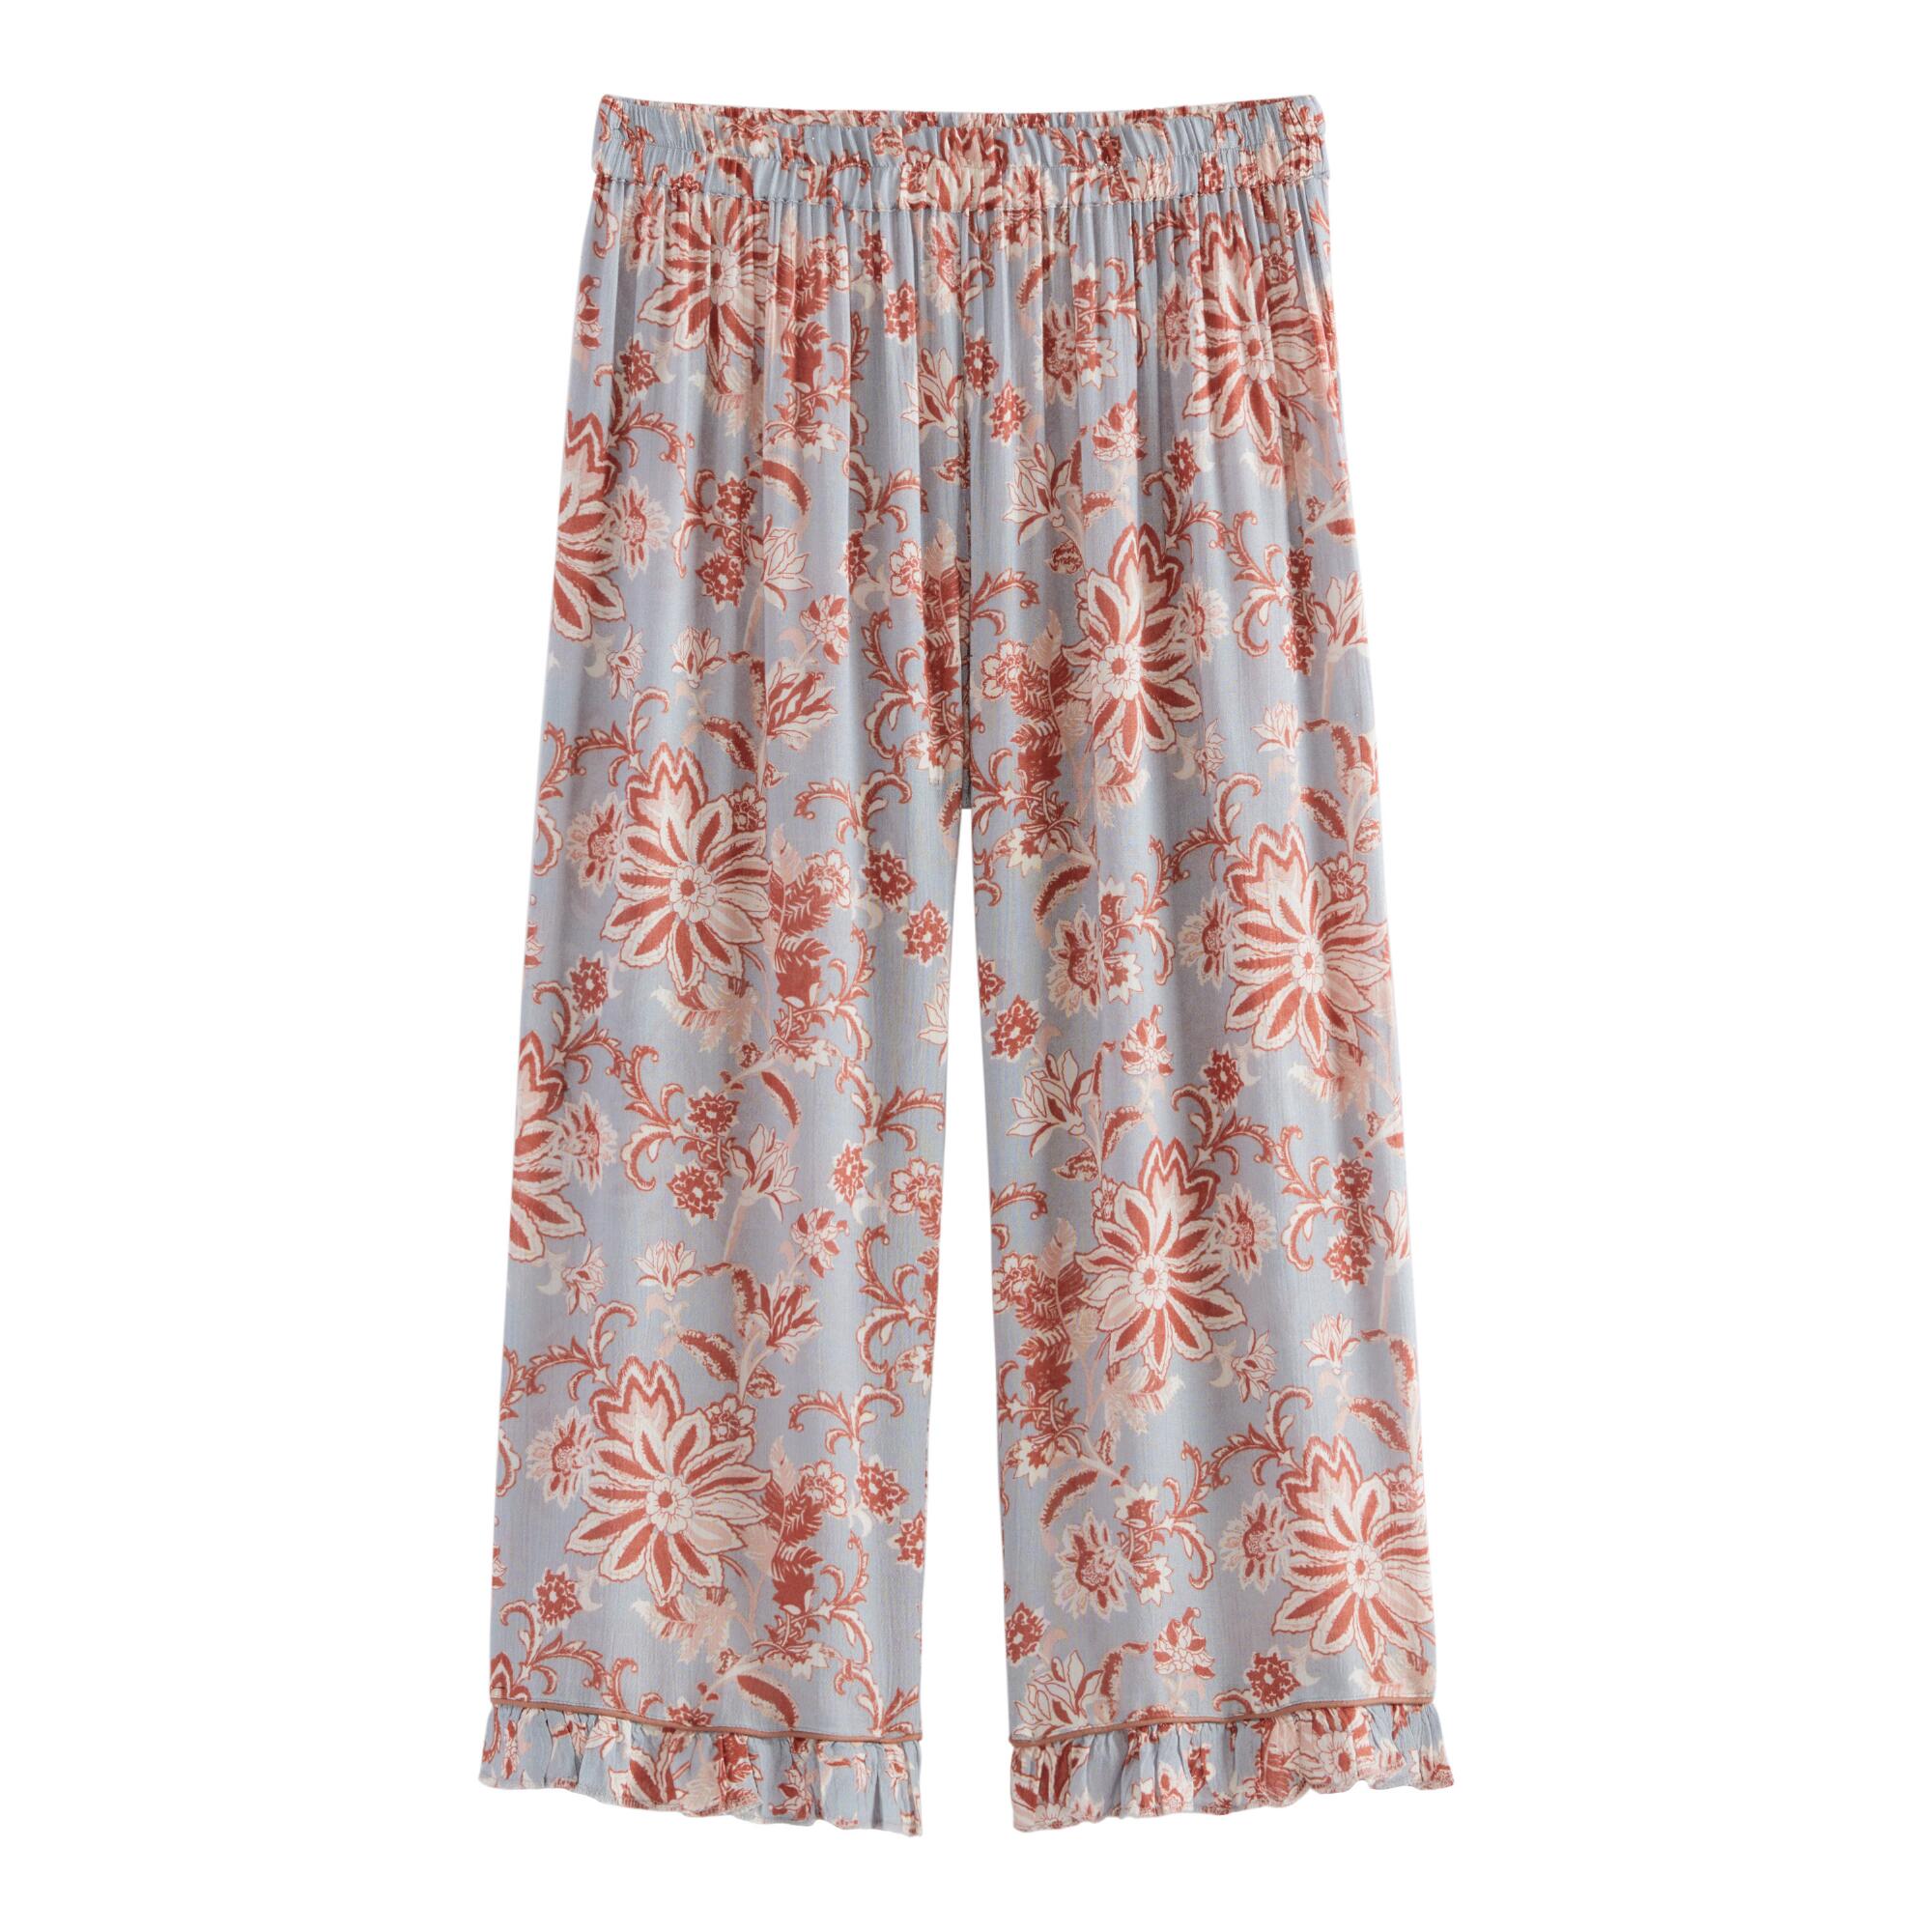 Dusty Blue and Brown Floral Cropped Celine Pajama Pants - Rayon by World Market